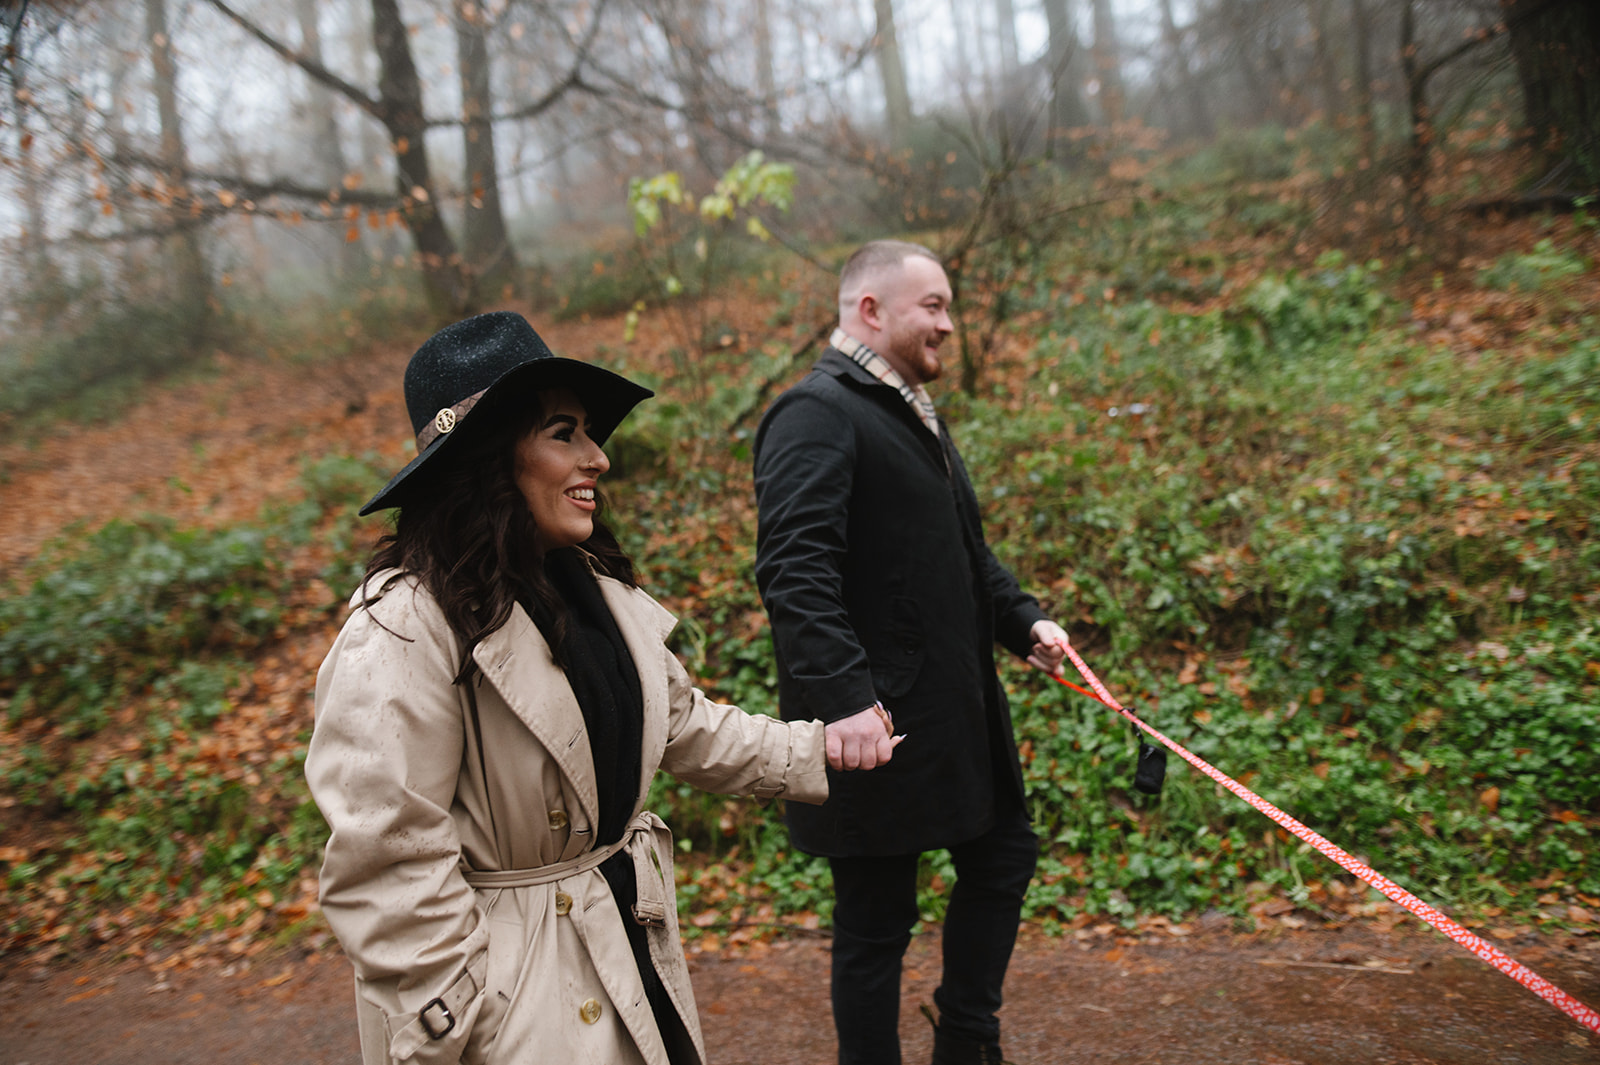 A rainy engagement shoot in the Clent Hills